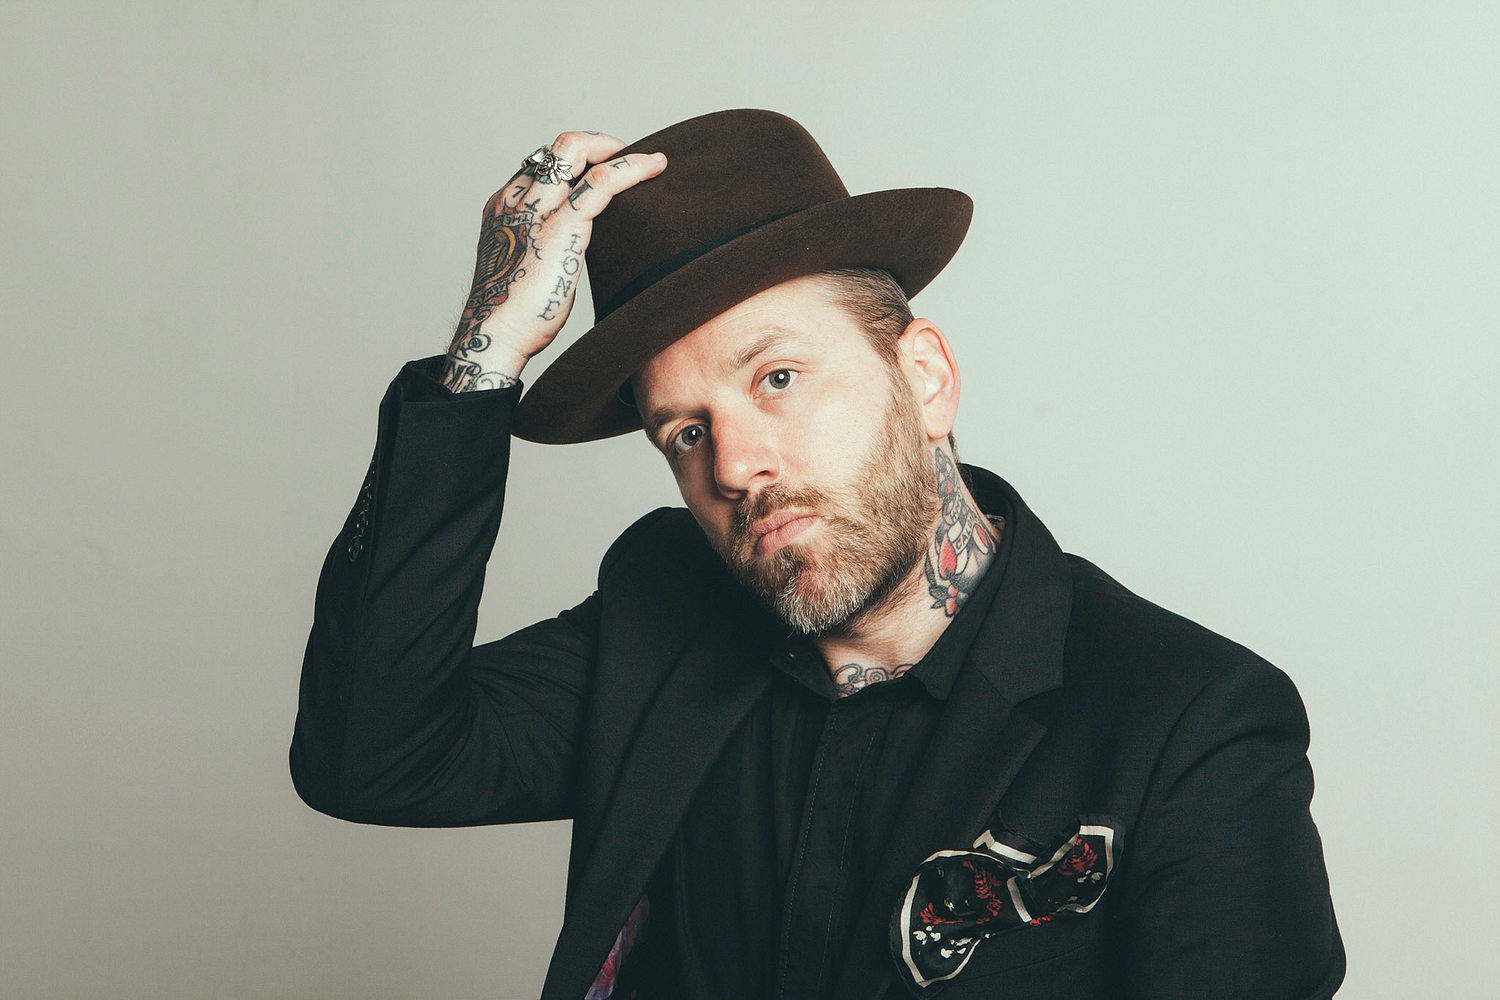 City and Colour showcases new video for ‘Lover Come Back’